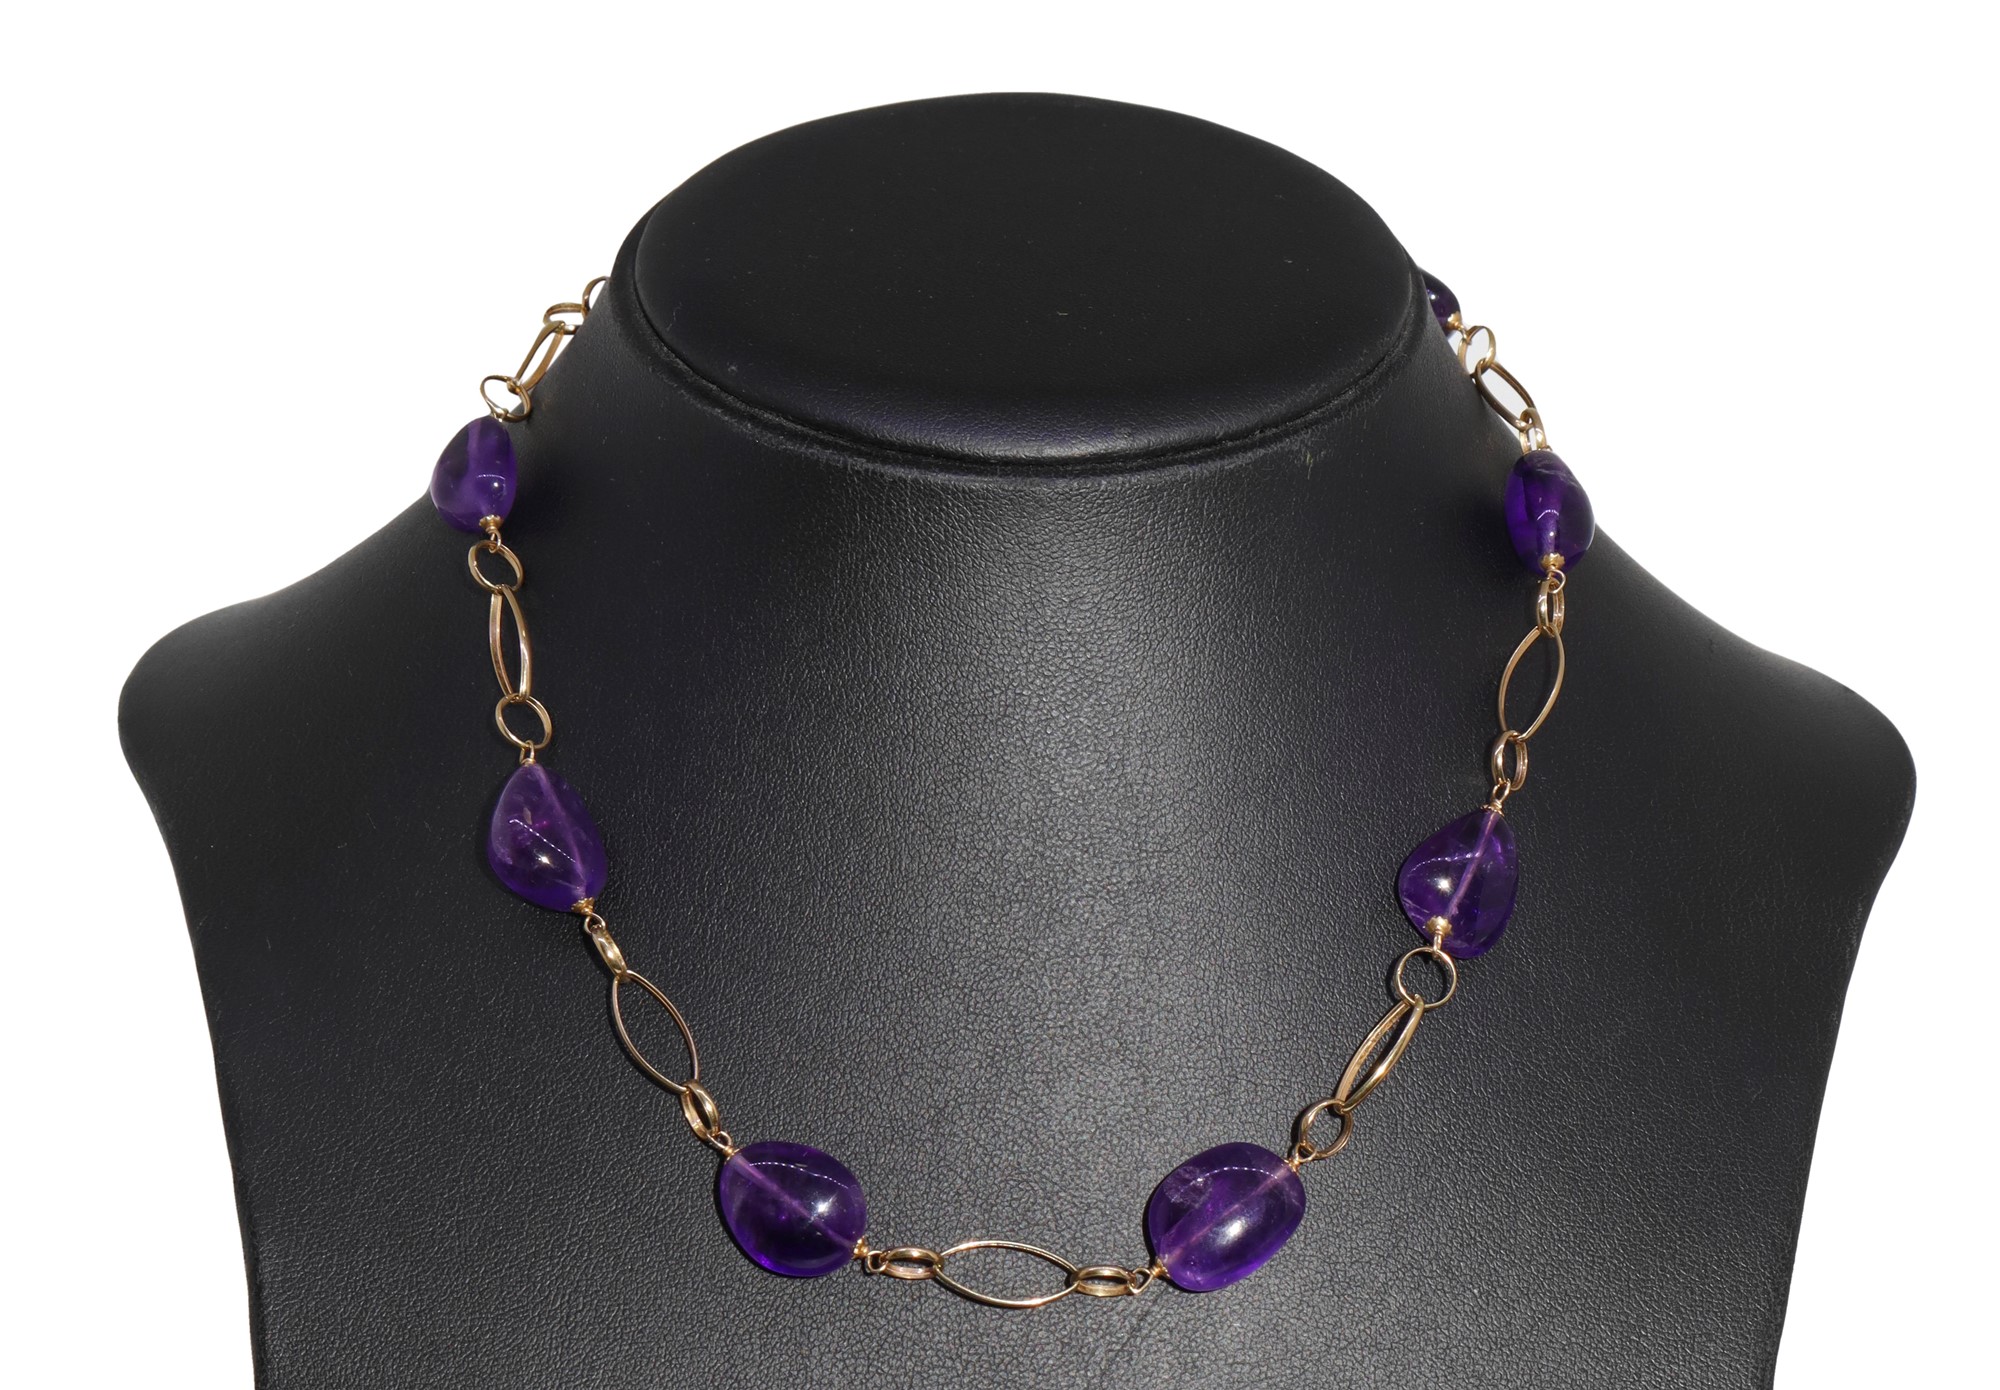 Gold necklace with amethysts - Image 2 of 4